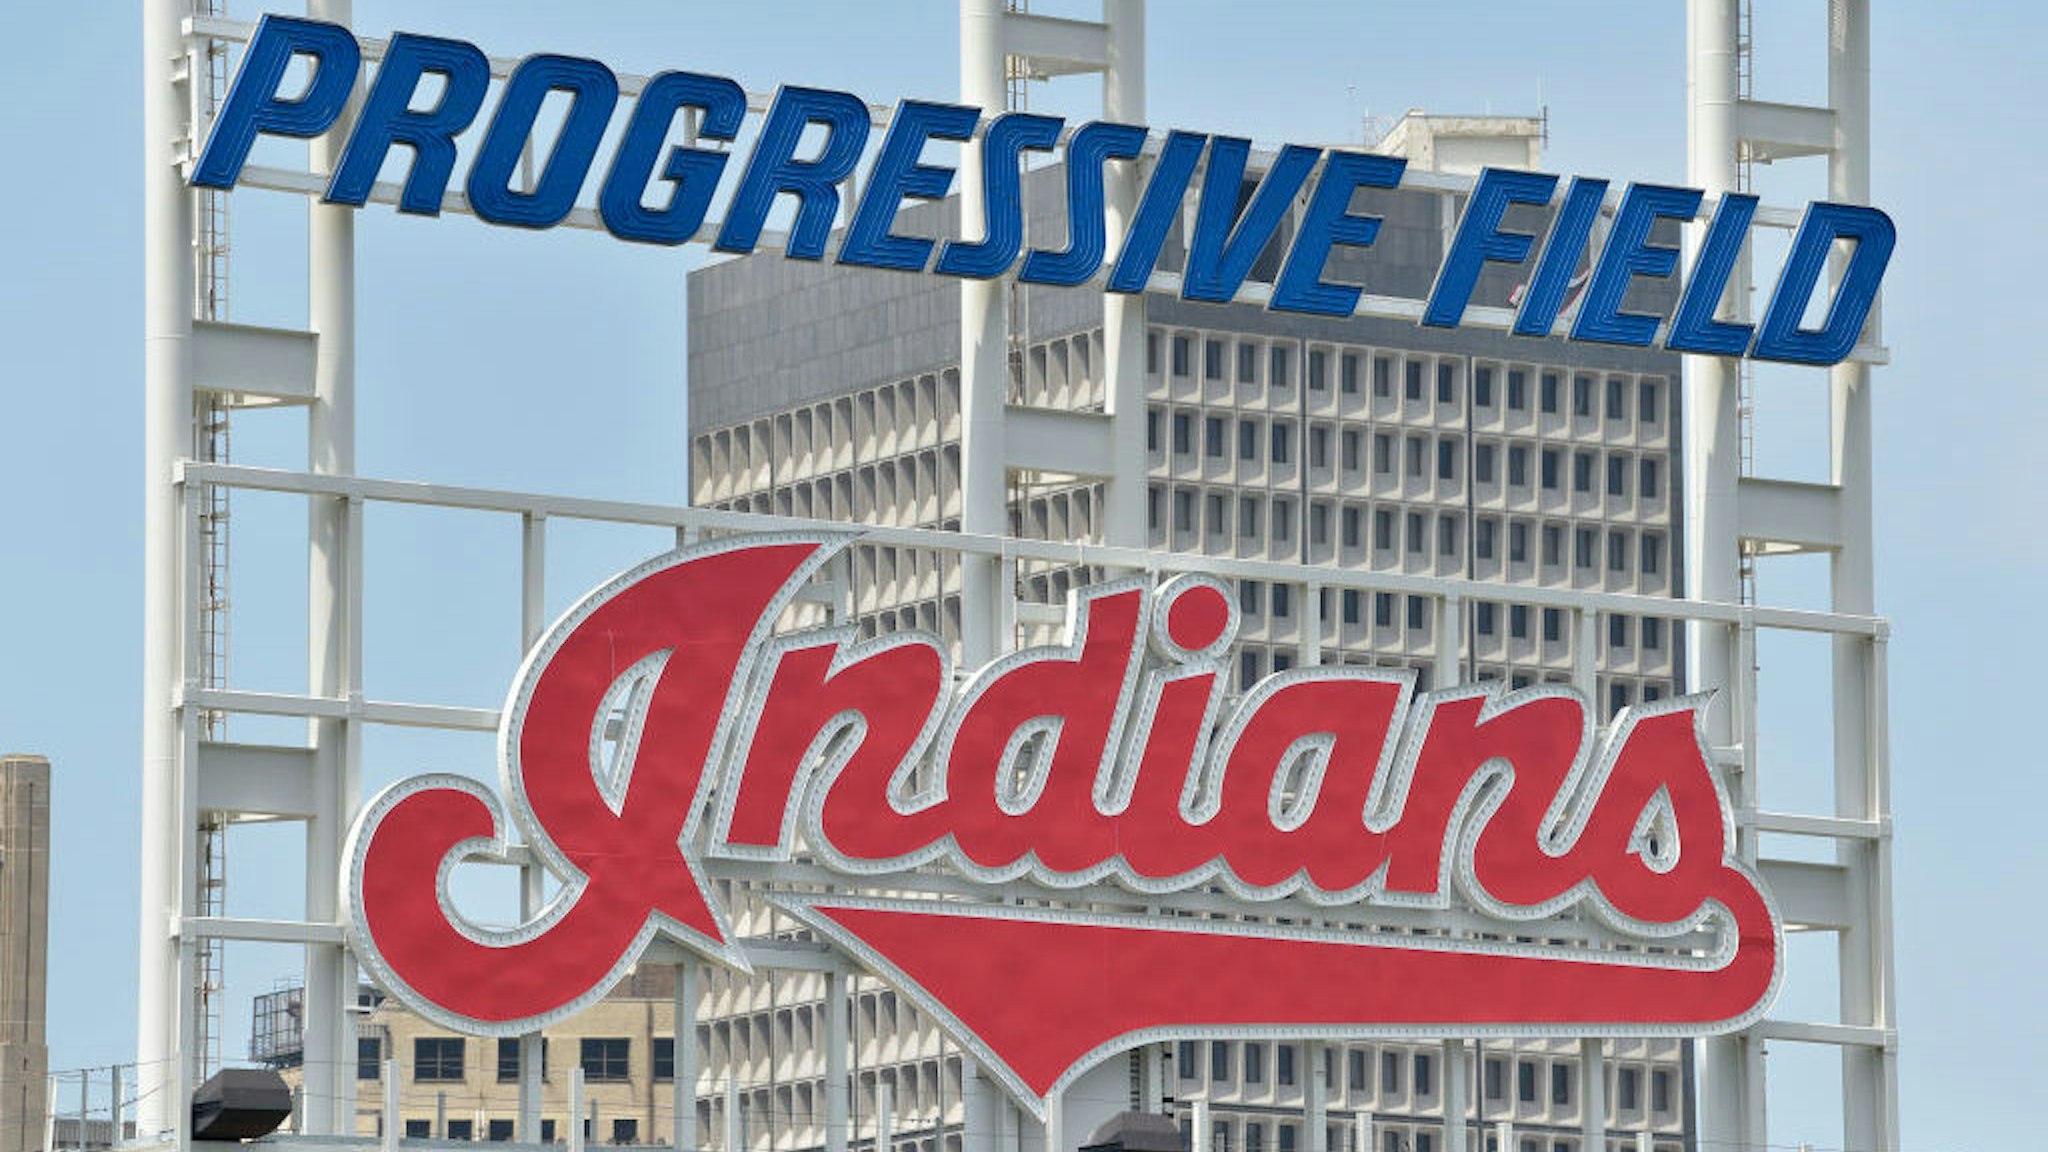 CLEVELAND, OHIO - JULY 07: The Cleveland Indians logo is seen at Progressive Field during summer workouts on July 07, 2020 in Cleveland, Ohio. (Photo by Jason Miller/Getty Images)